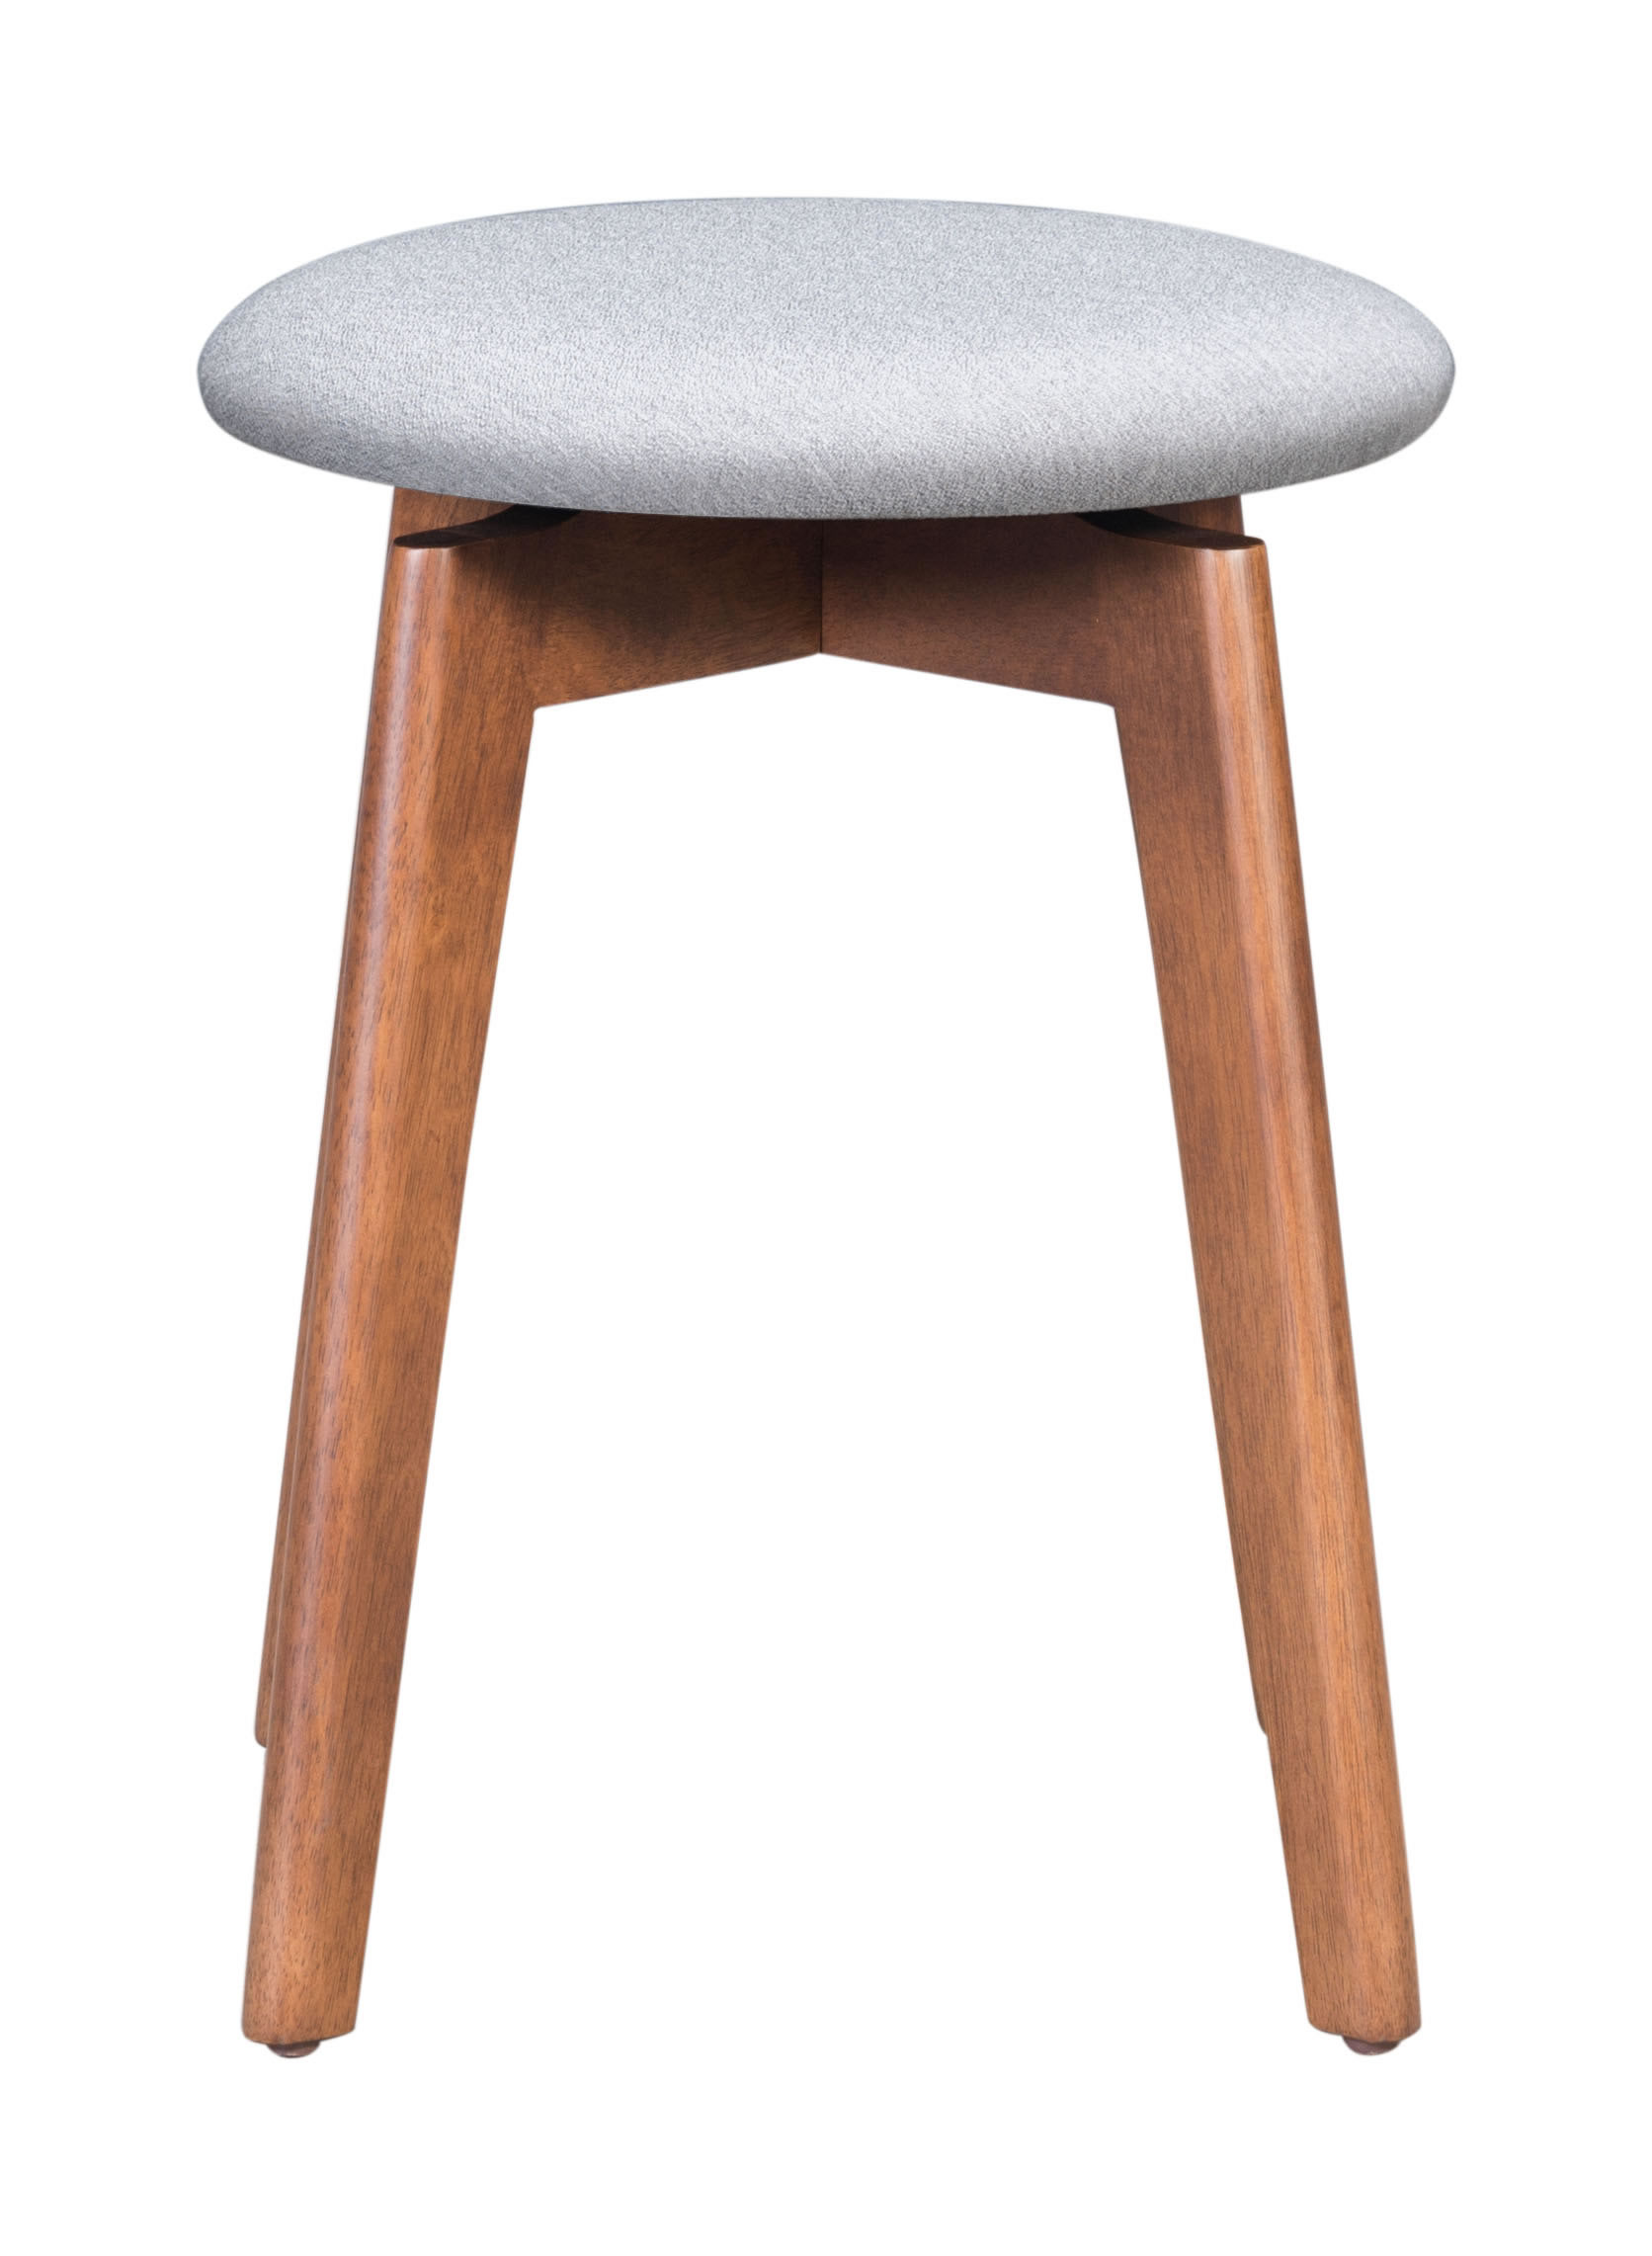 18.1" x 18.1" x 19.3" Walnut and Light Gray Poly Linen MDF Rubber Wood Stool Set of 2